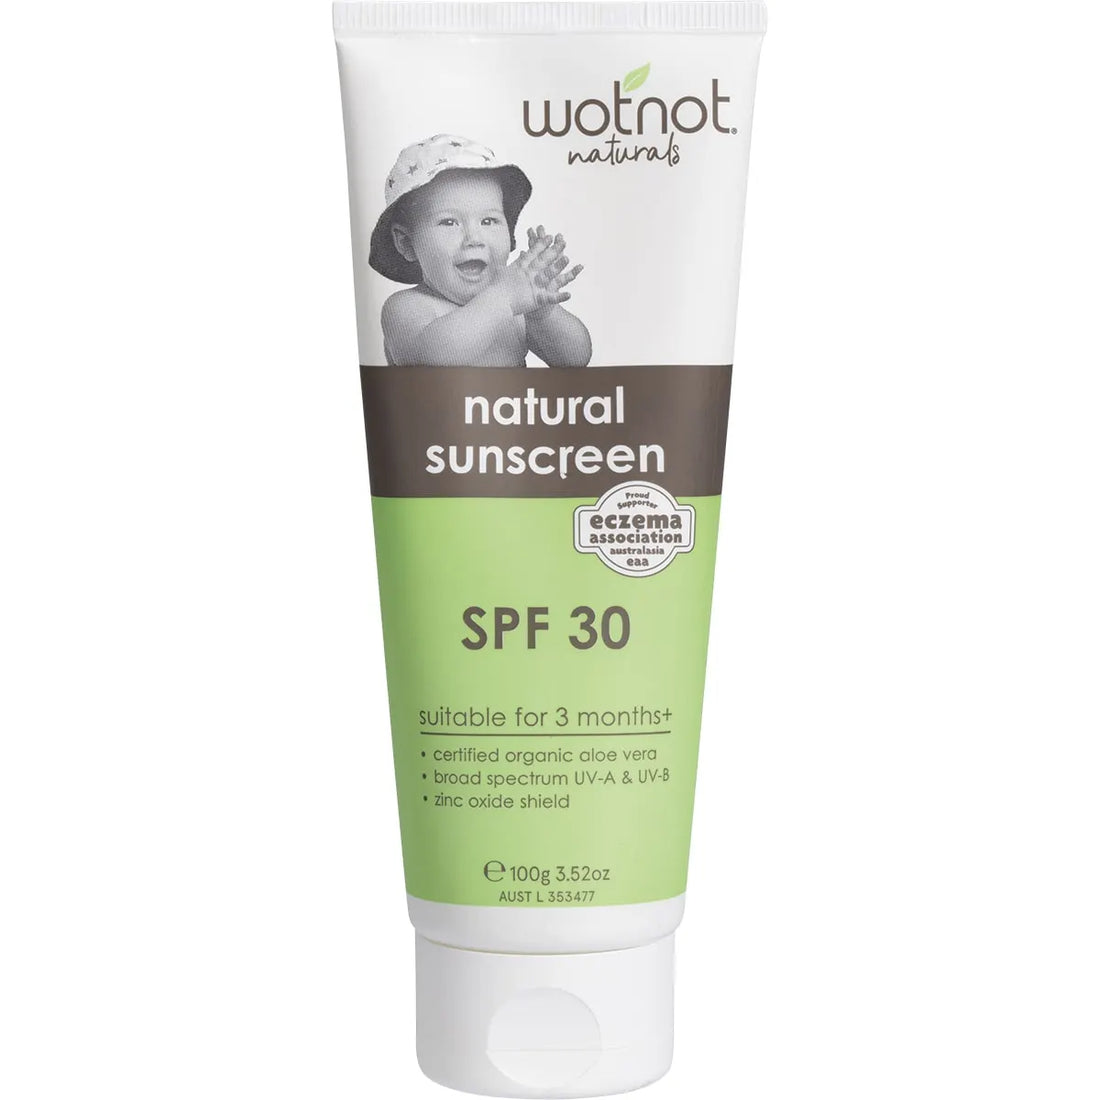 WOTNOT Natural Sunscreen SPF 30 Suitable for 3 Months+ 100g